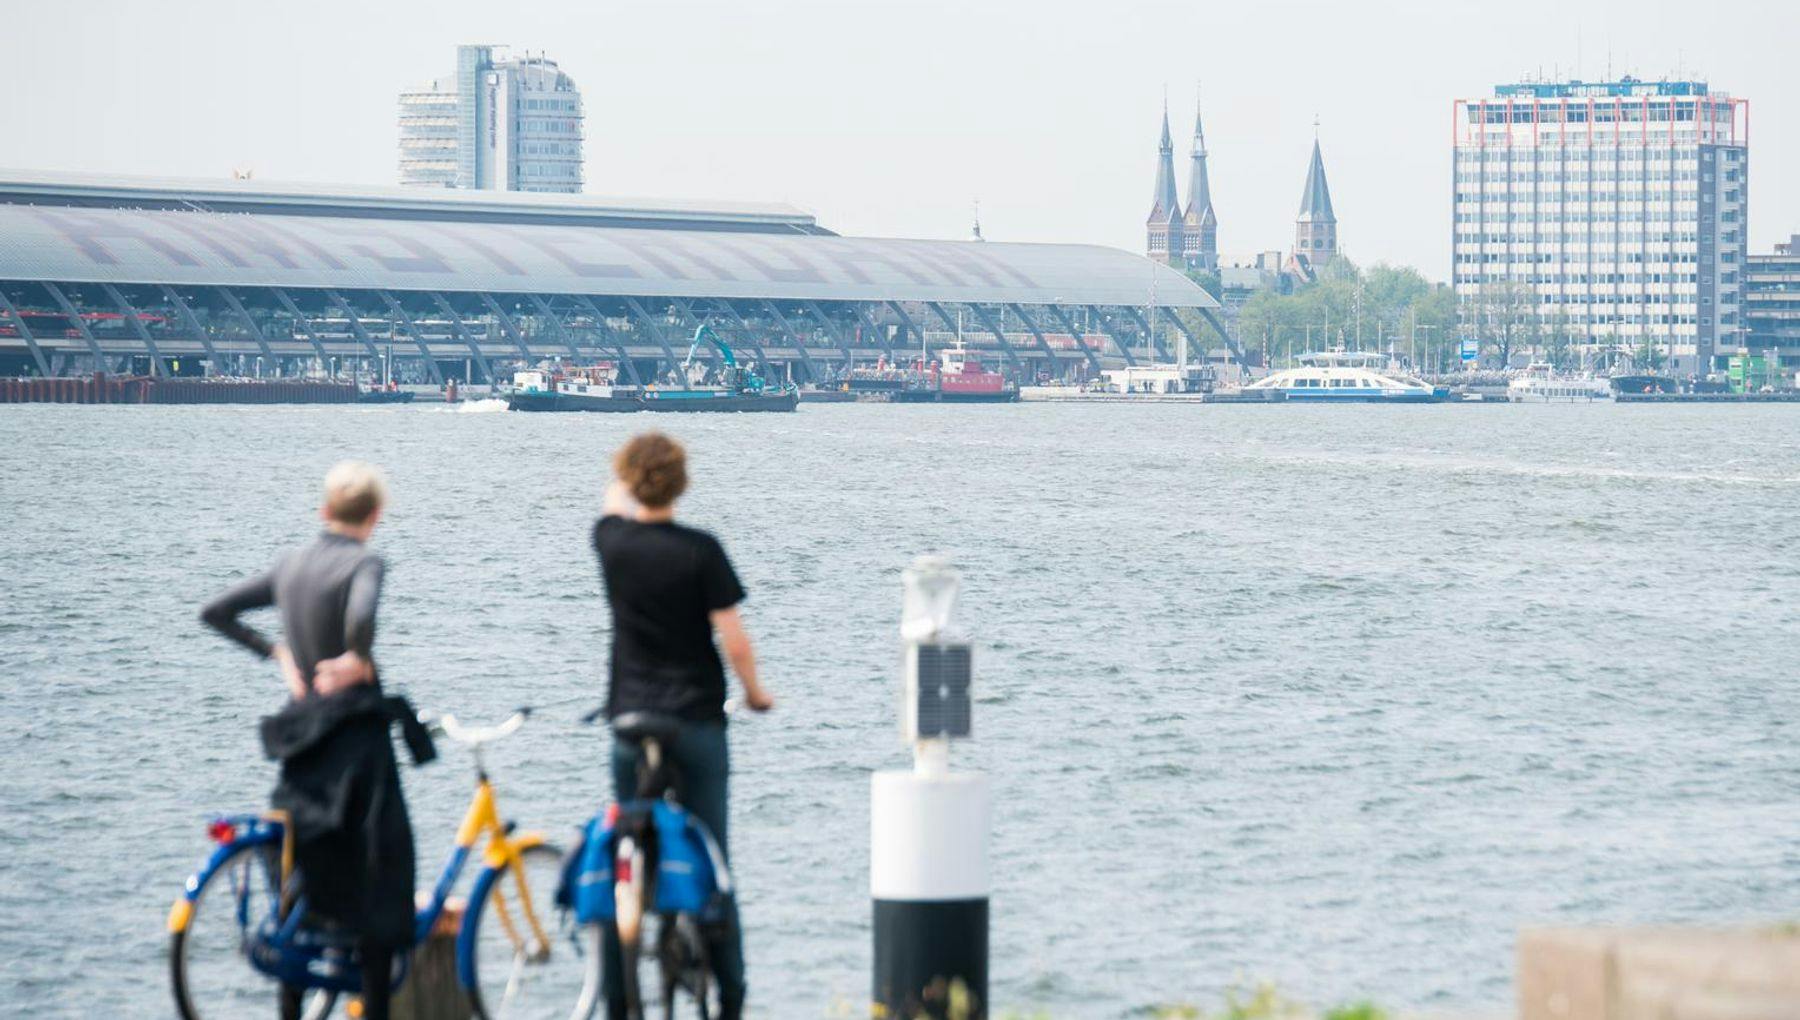 Cyclists looking over IJ River towards Centraal Station